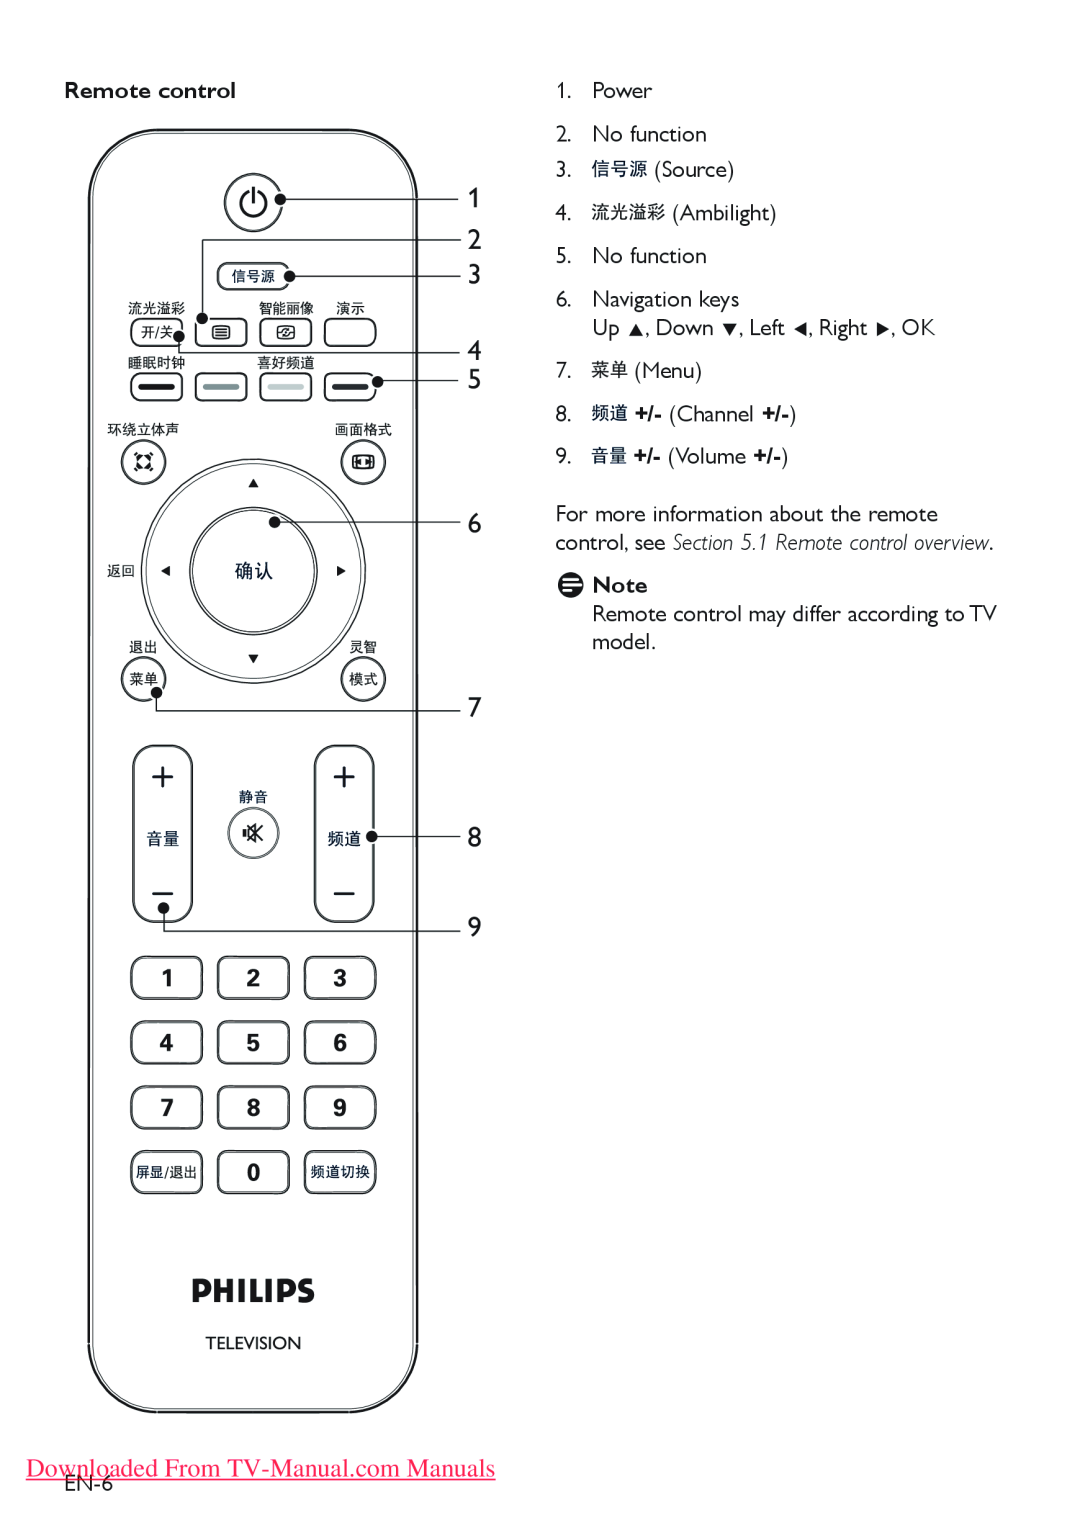 Philips 52PFL7403 1 2 3 4, Remote control, Downloaded From TV-Manual.comManuals, No function 6.Navigation keys, DDNote 